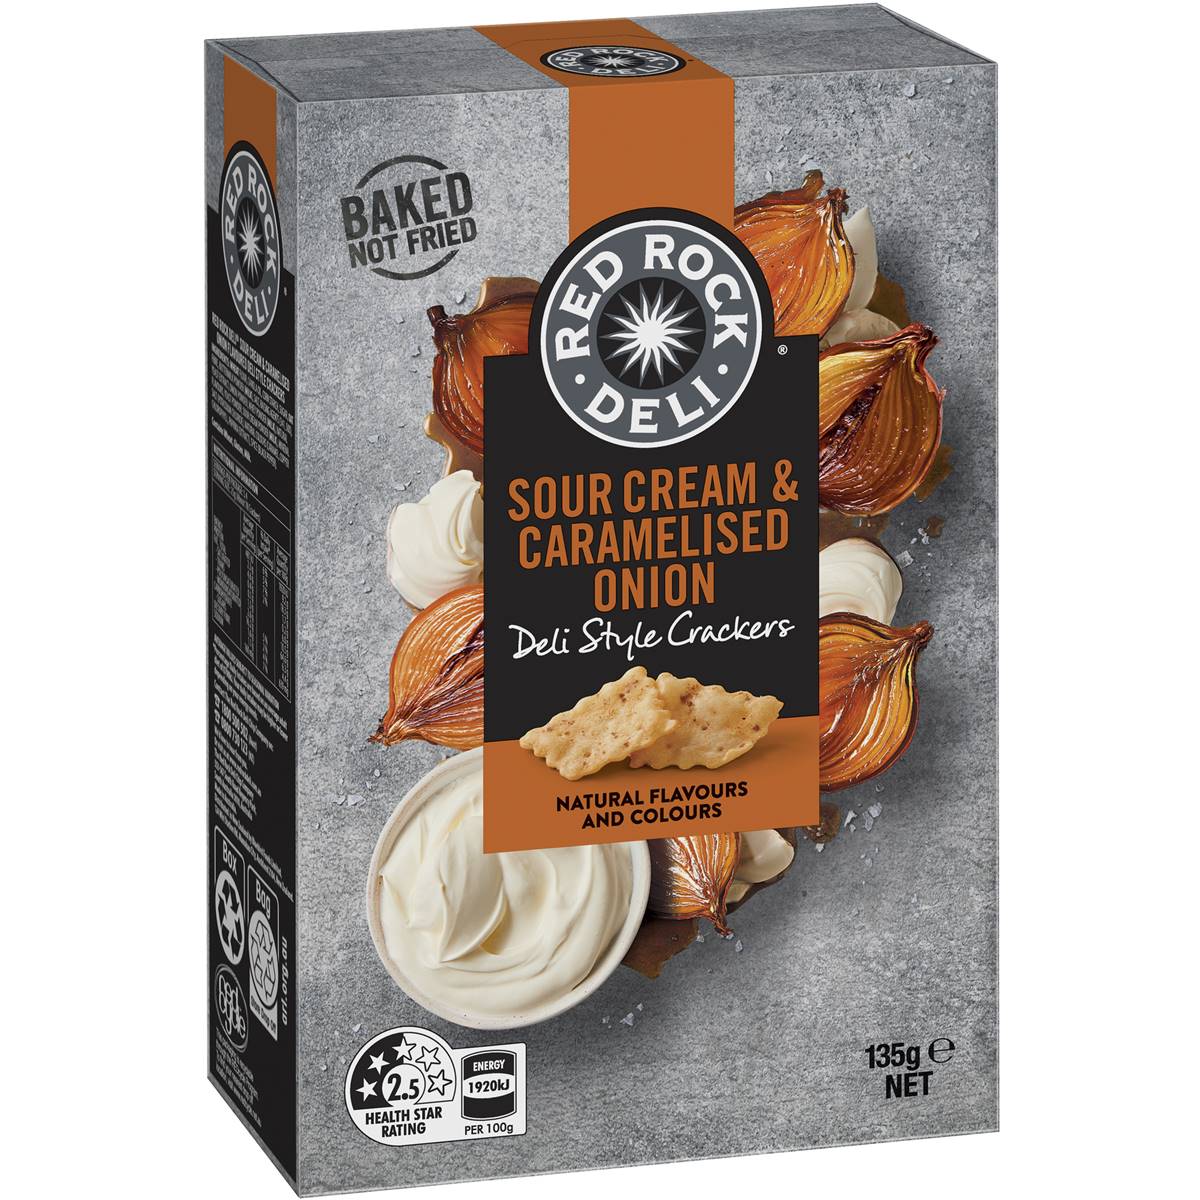 Calories in Red Rock Deli Cracker Sour Cream & Caramelised Onion Crackers